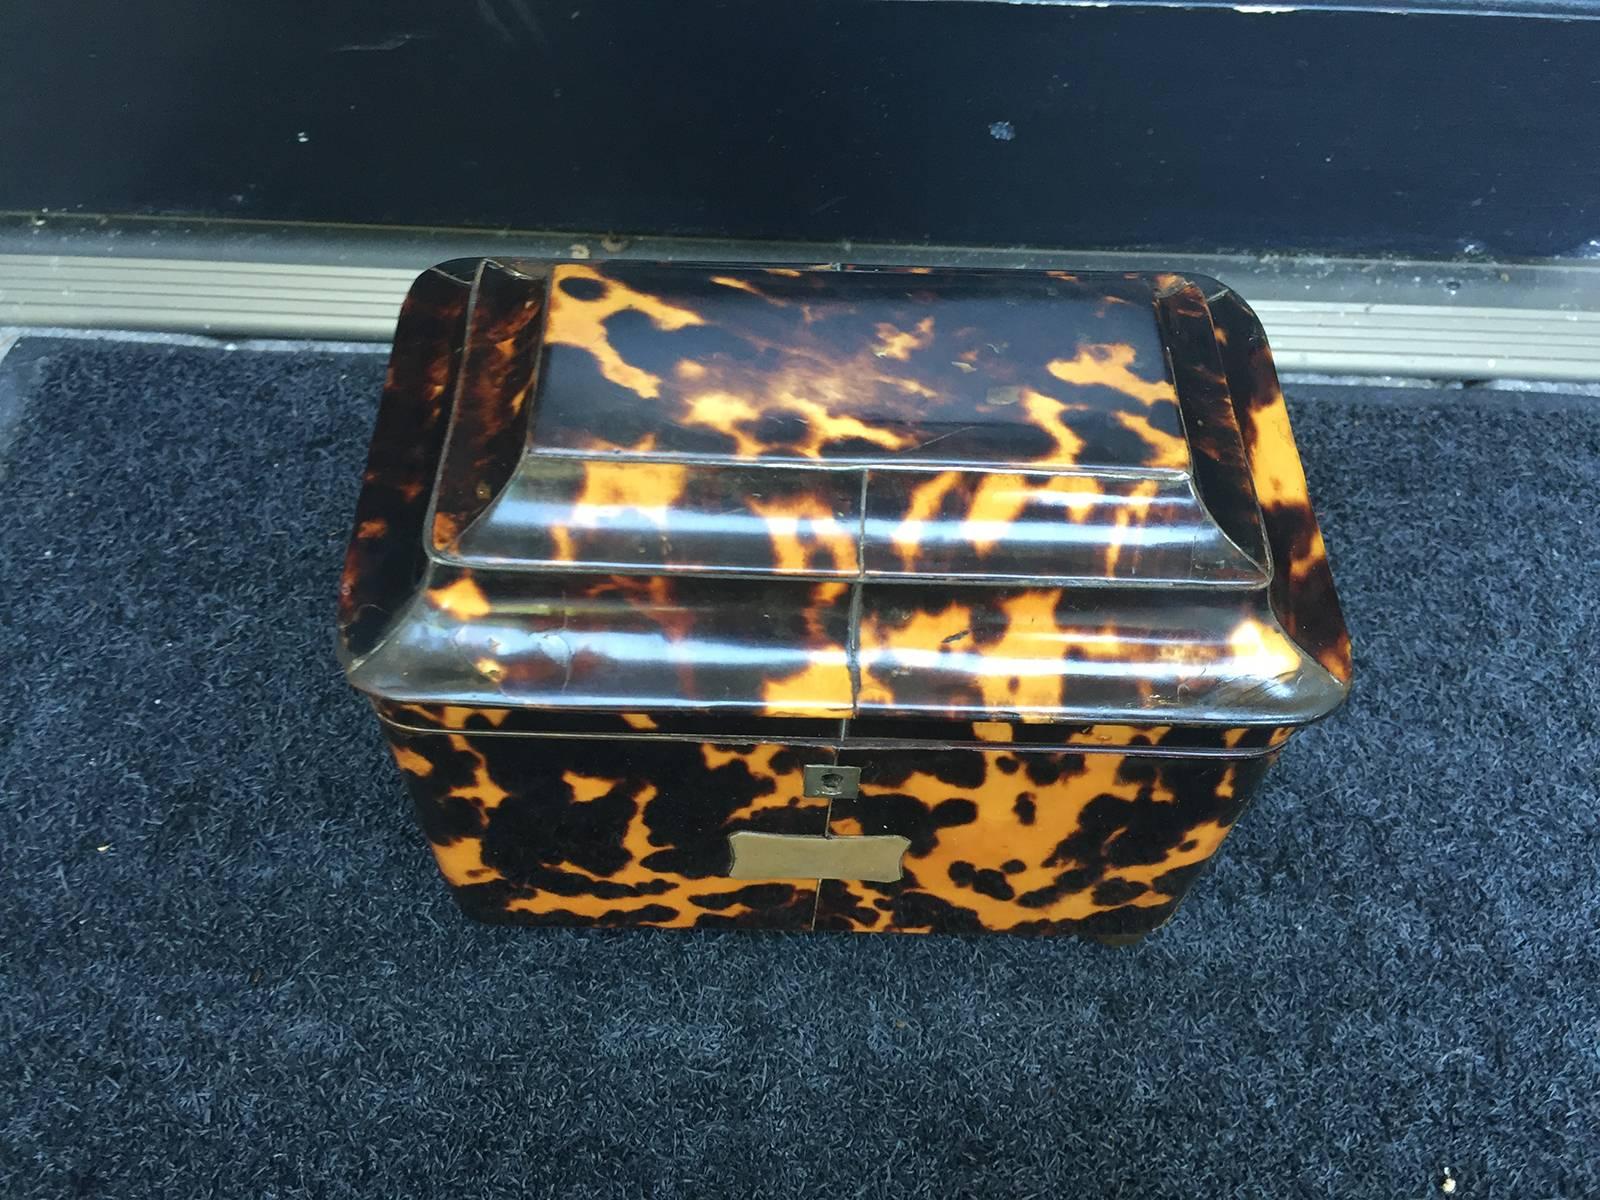 19th century chocolate tortoise shell serpentine tea caddy in unbelievable condition.